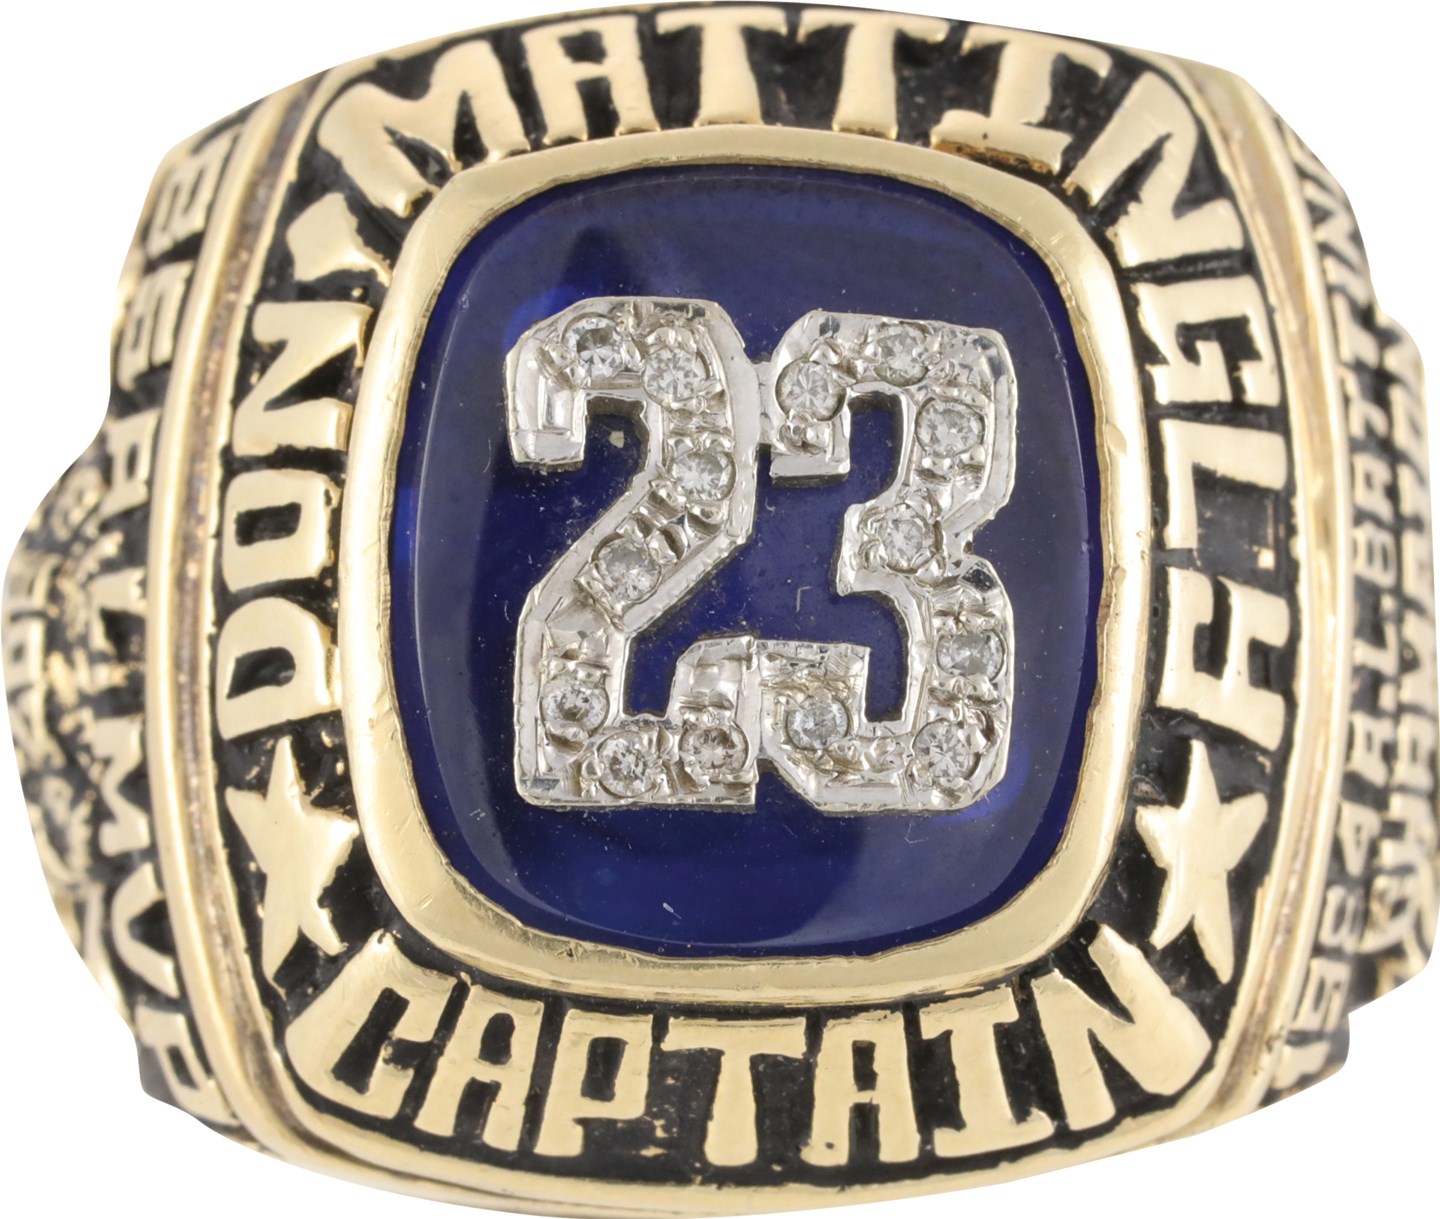 - 1998 Don Mattingly Limited Edition Career Ring